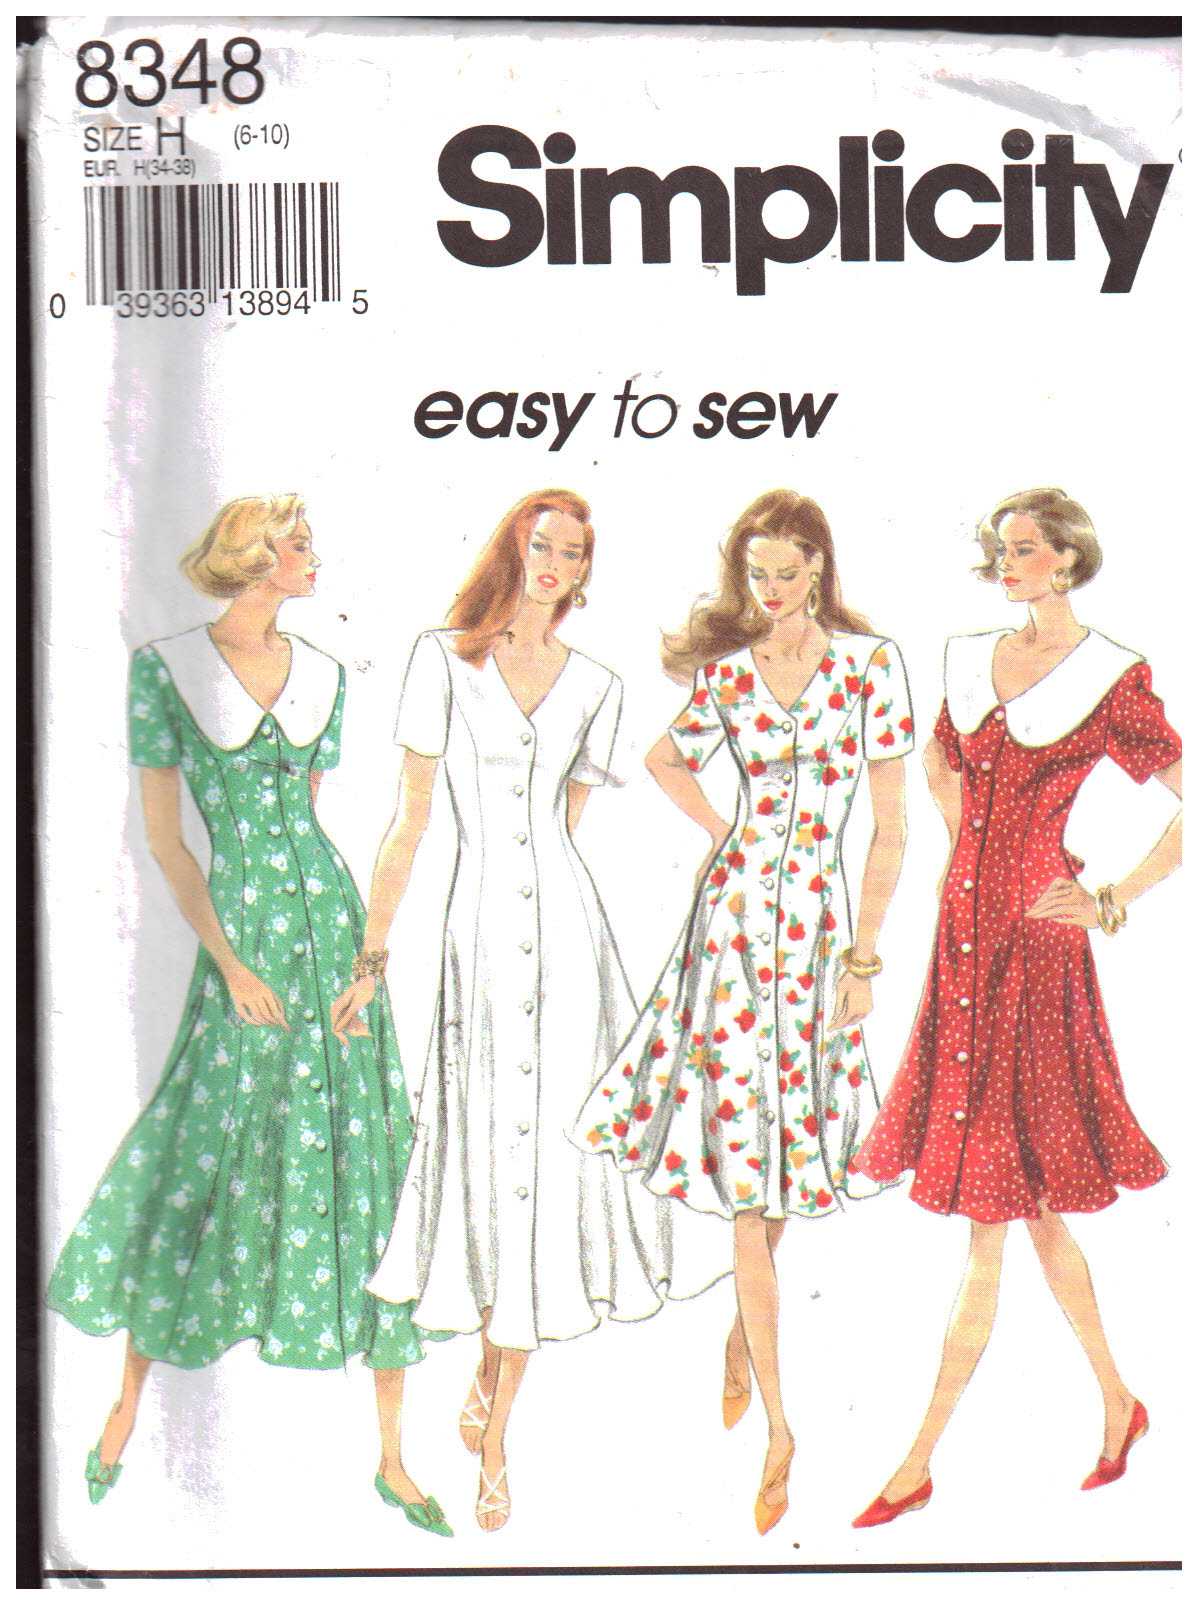 Simplicity 8348 Dress in two lengths Size: H 6-10 Uncut Sewing Pattern